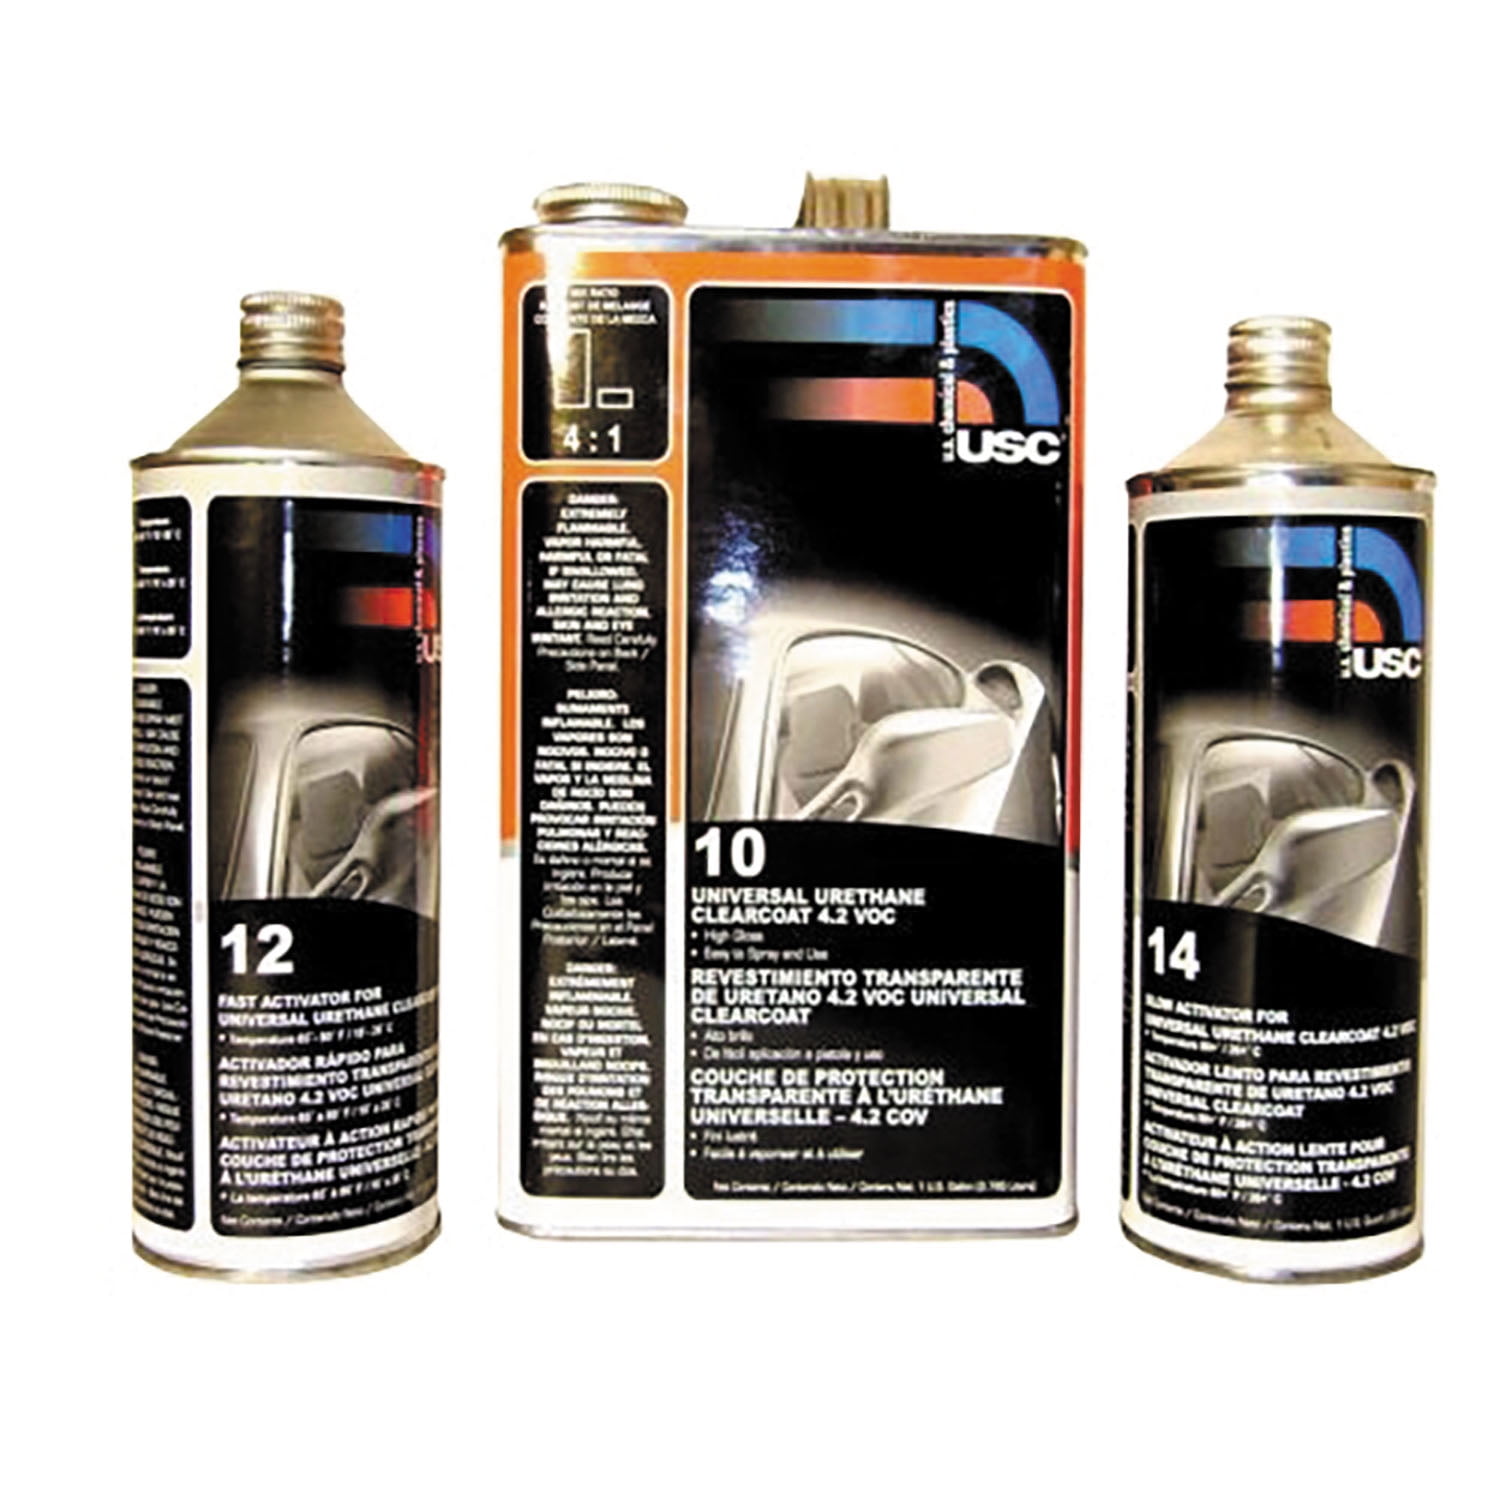 USC-13-4 USC 10 UNIVERSAL CLEARCOAT MEIDUM ACTIVATOR QUART ONLY 